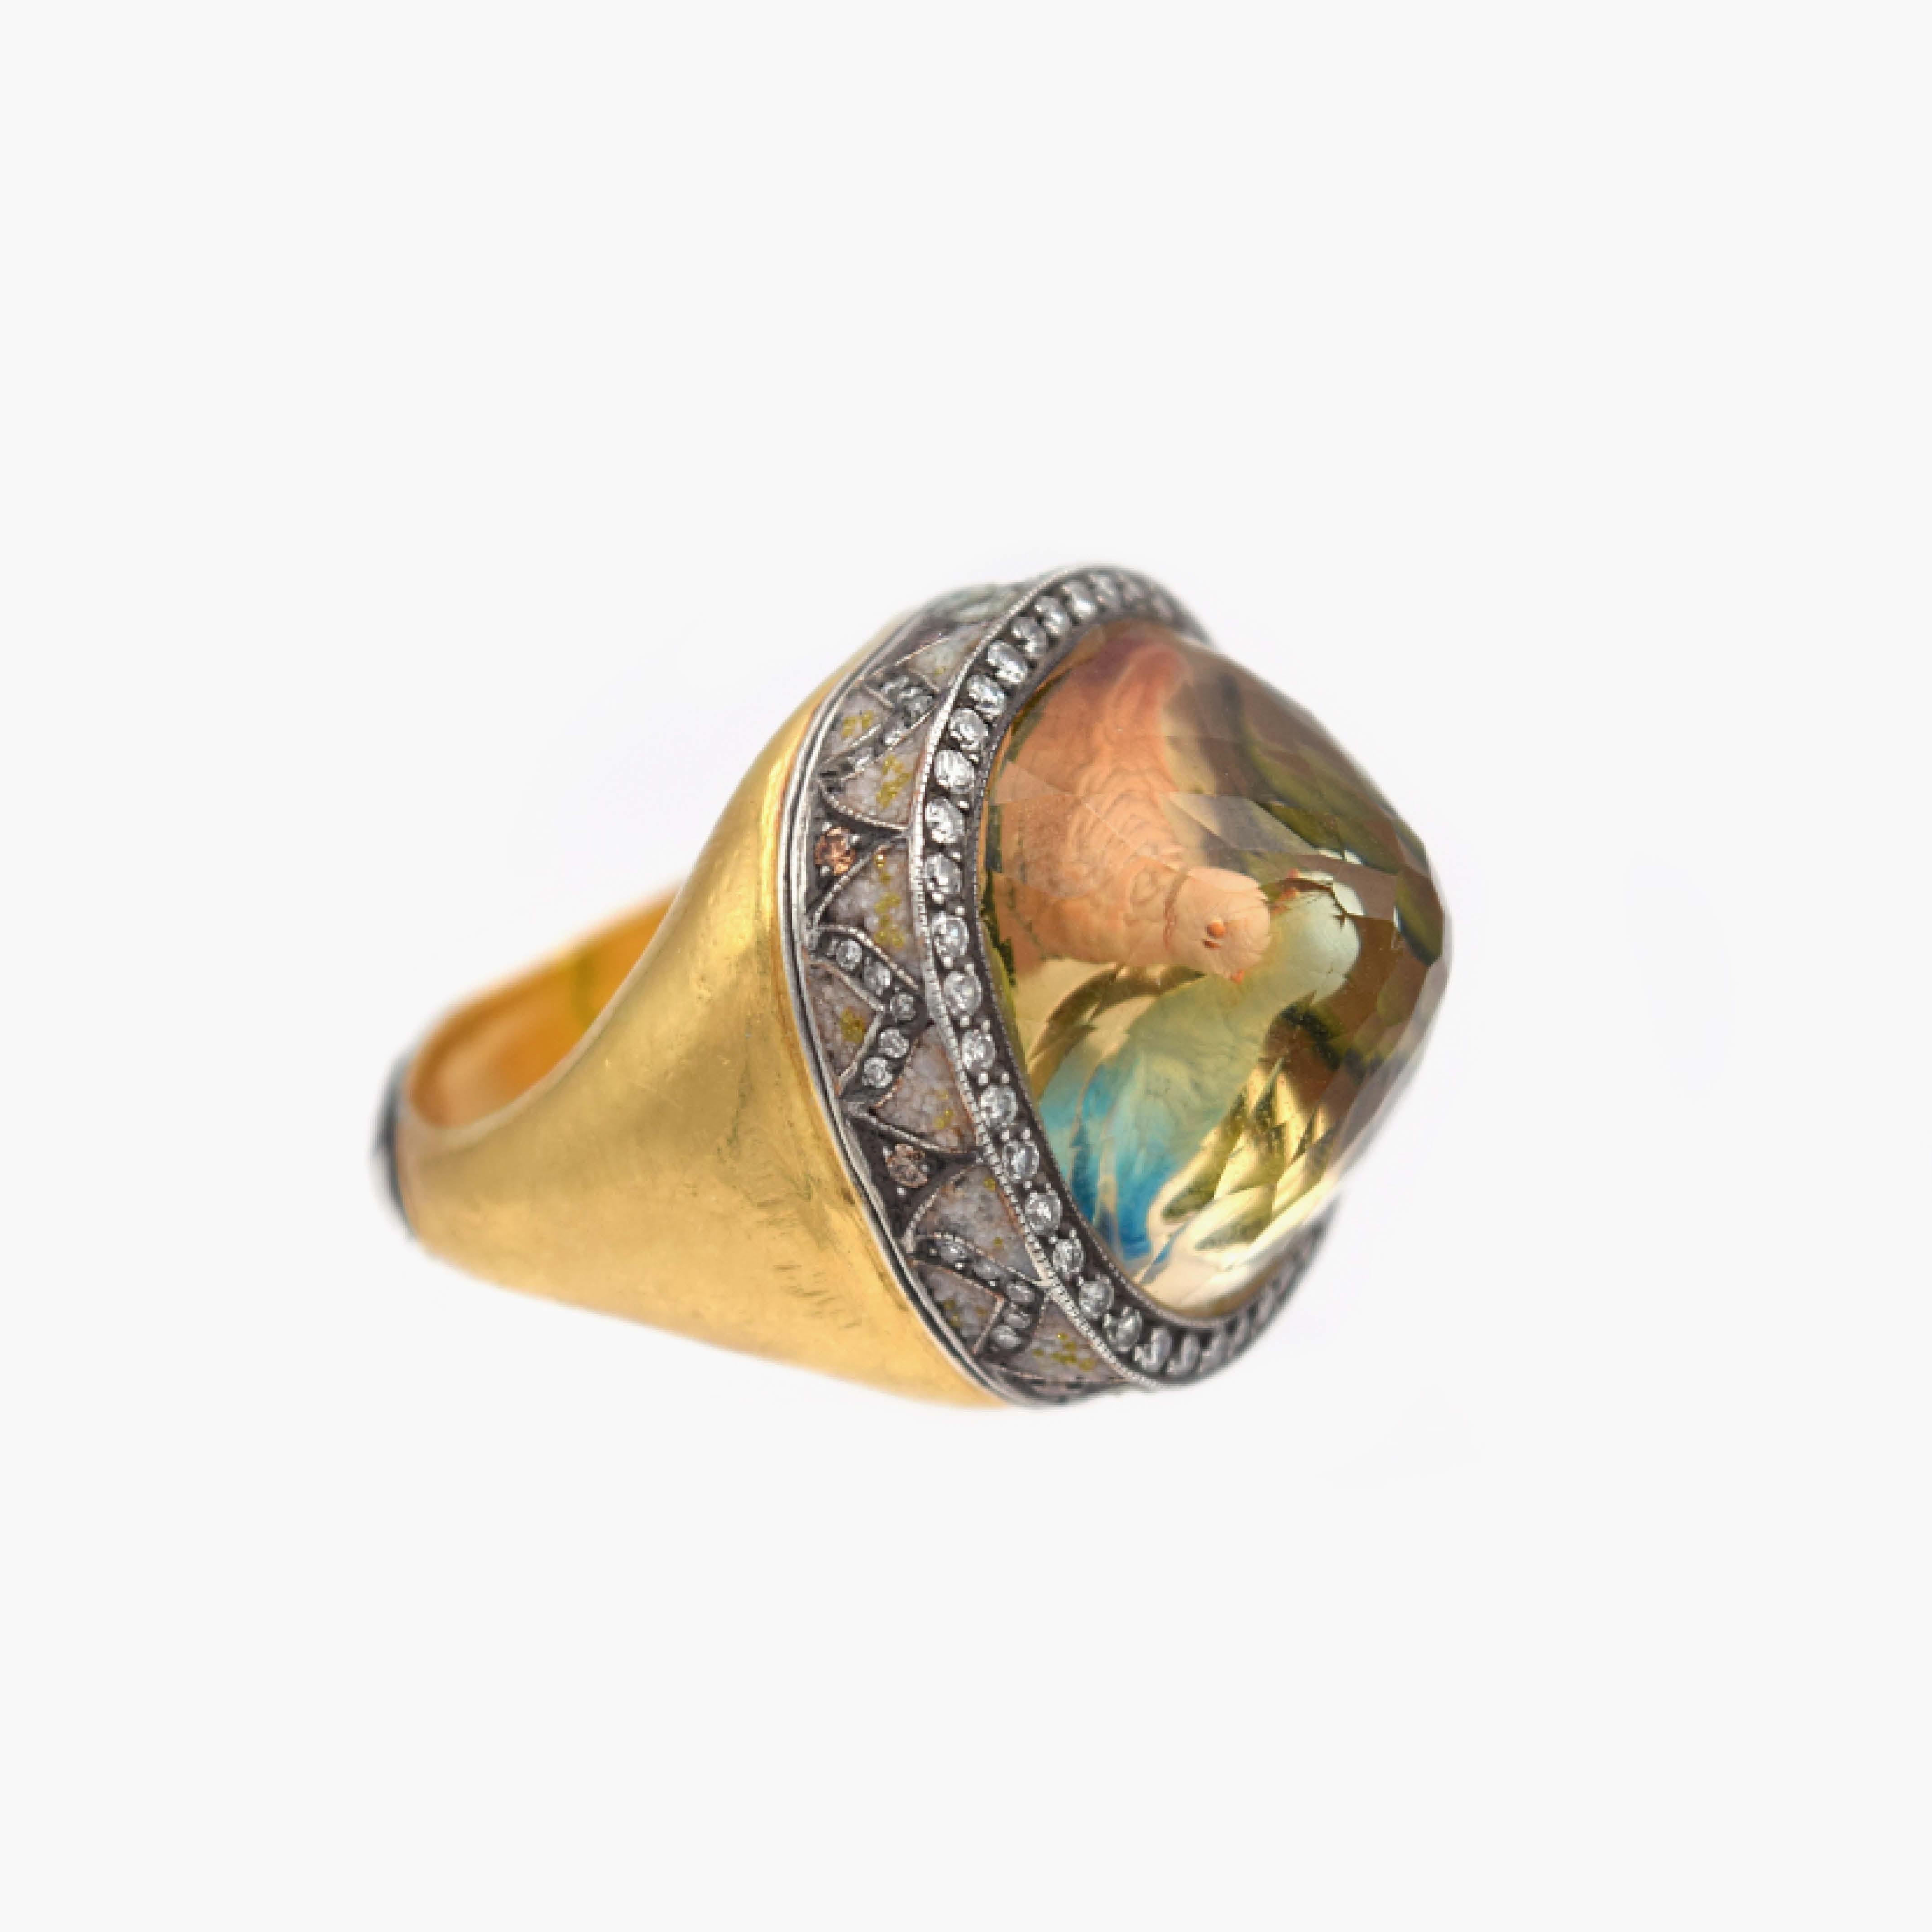 From the astounding work of Sevan Biçakçi, inspired by the rich culture rooted in his homeland of Istanbul, this collection represents the layered and beautiful history of our past.

This quartz ring features reverse, hand-carved intaglio doves with